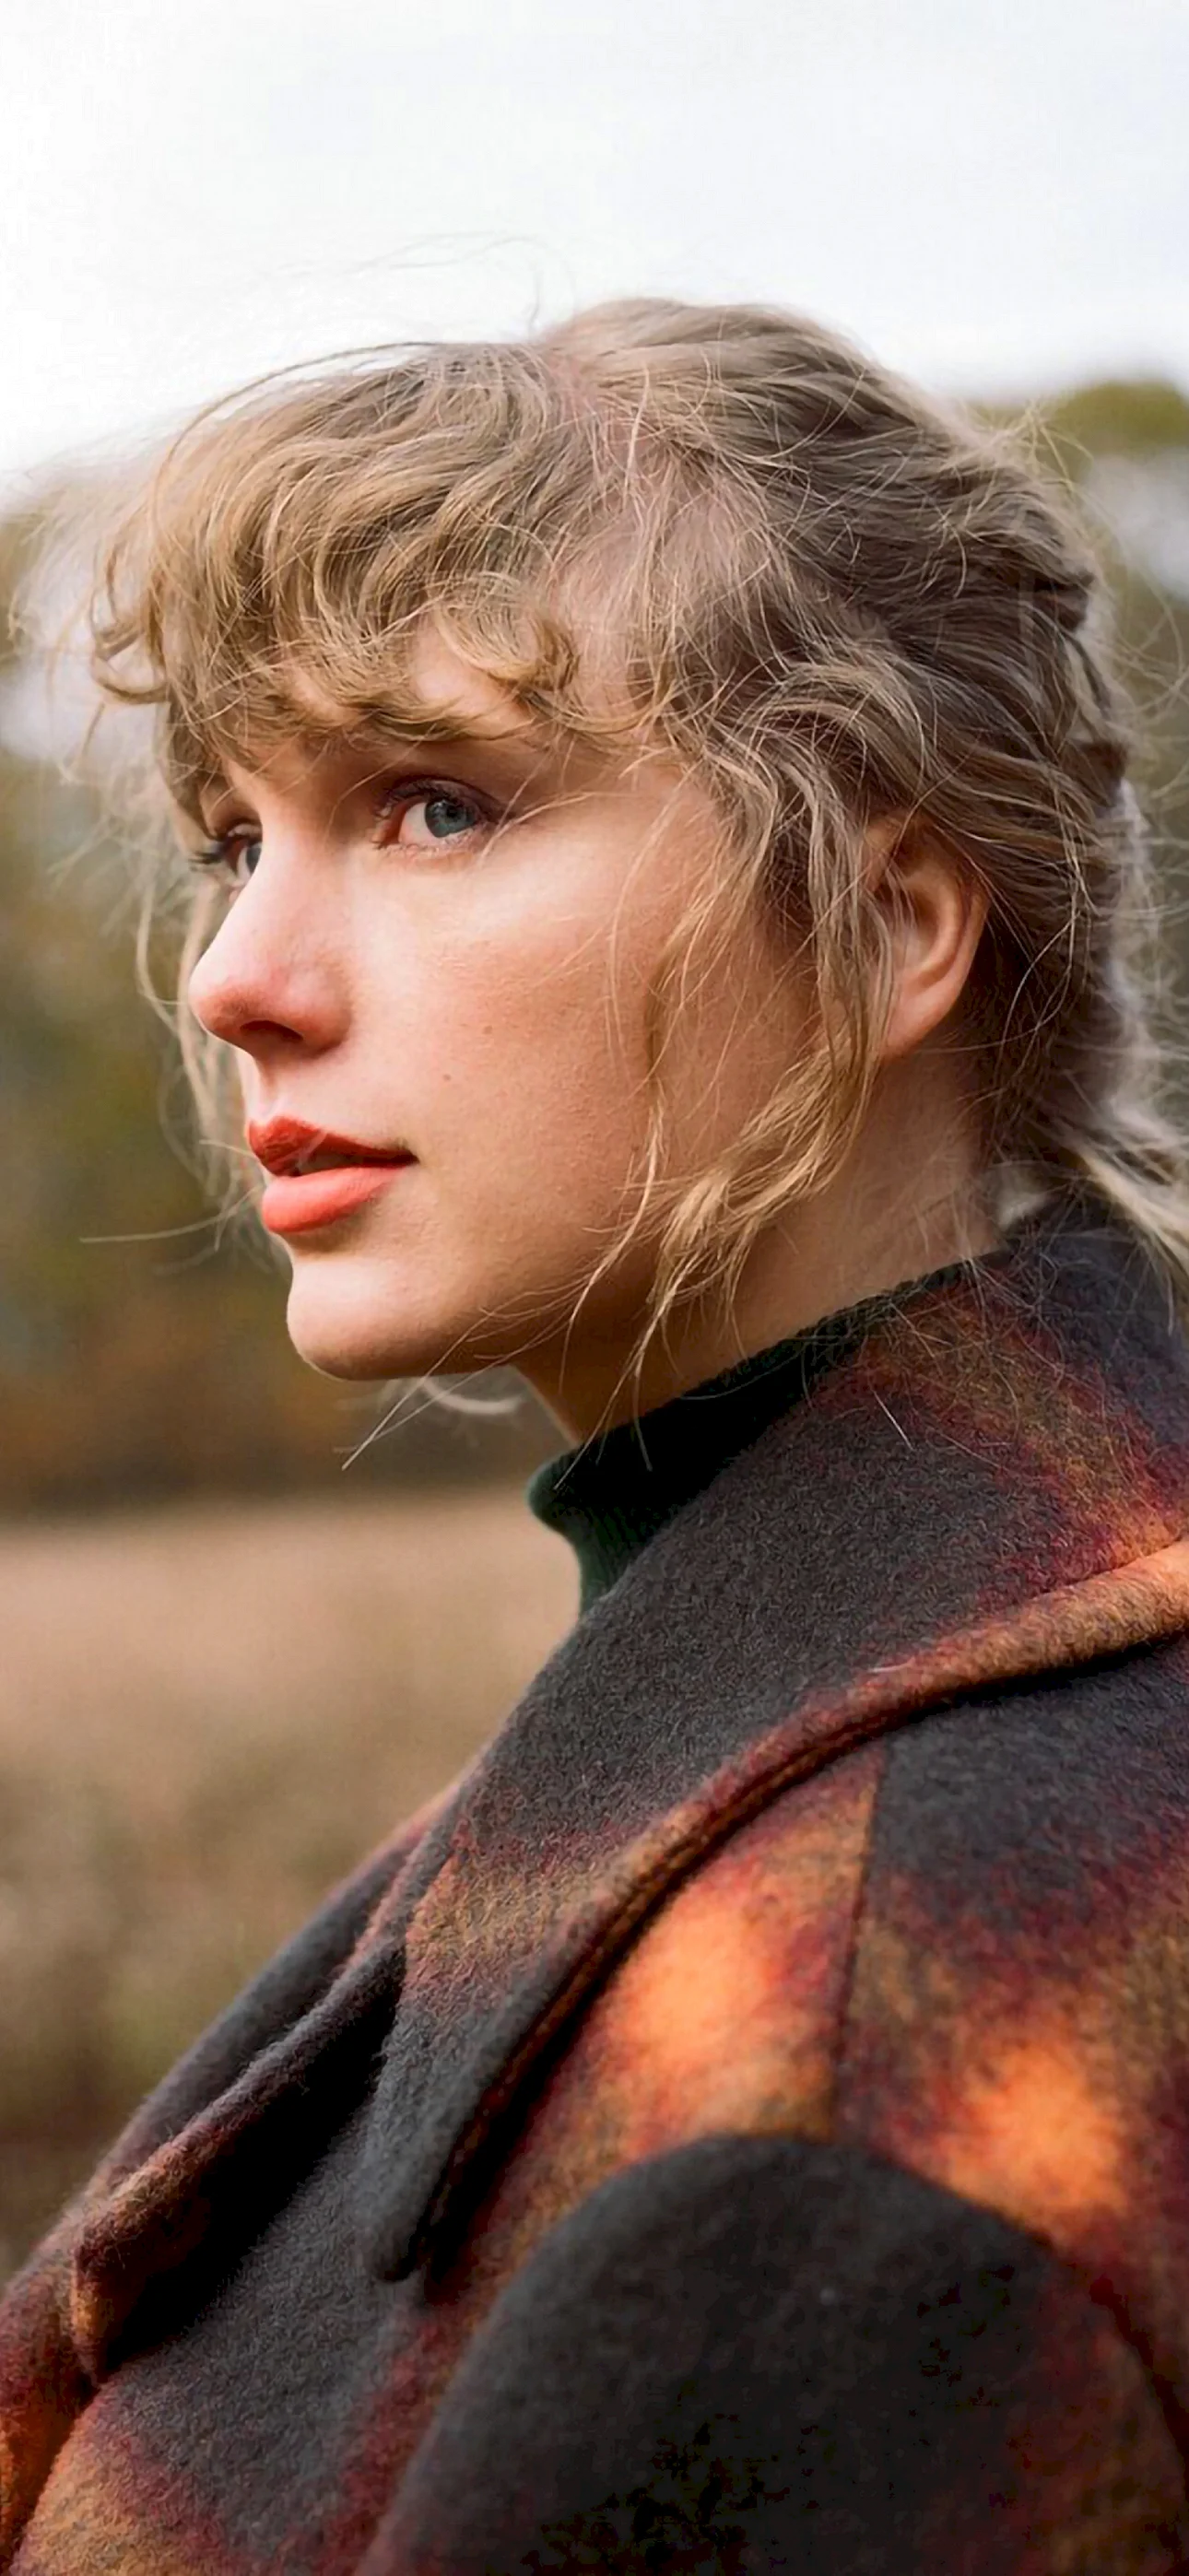 Taylor Swift Evermore Album Wallpaper For iPhone